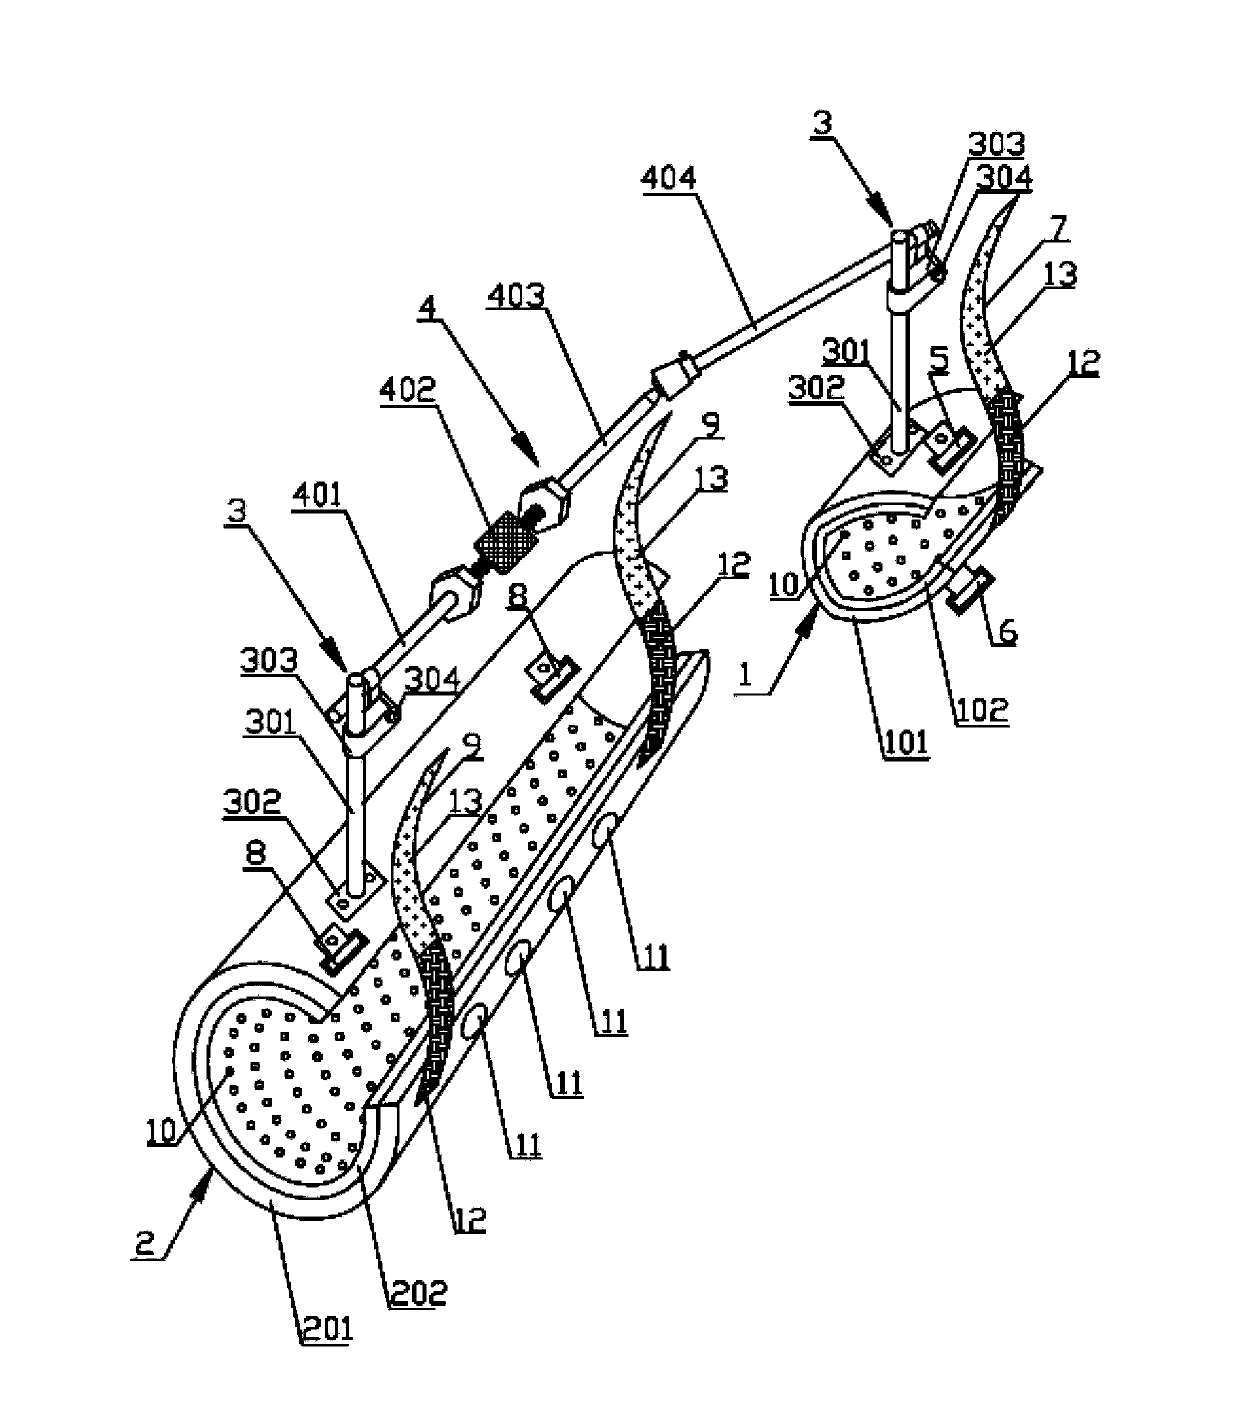 Wound-free adjusting type splint holder support used for fracture of distal radius